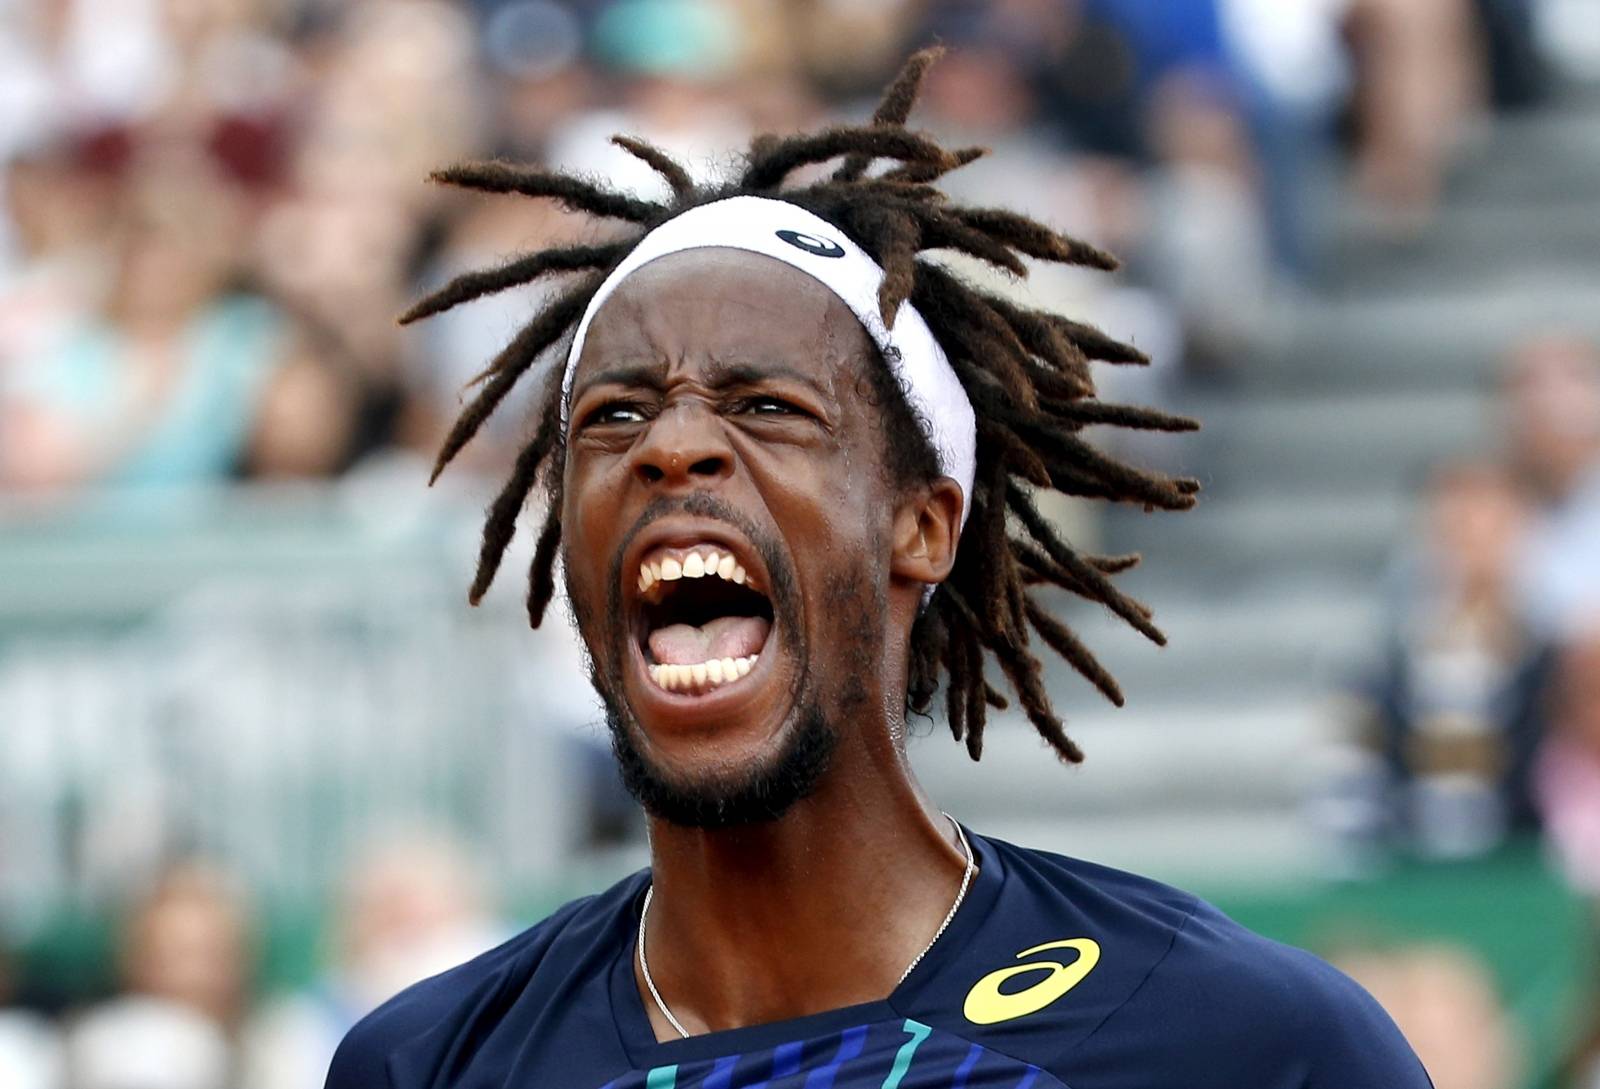 FILE PHOTO: Gael Monfils of France reacts during the final of the Monte Carlo Masters against Rafa Nadal of Spain.